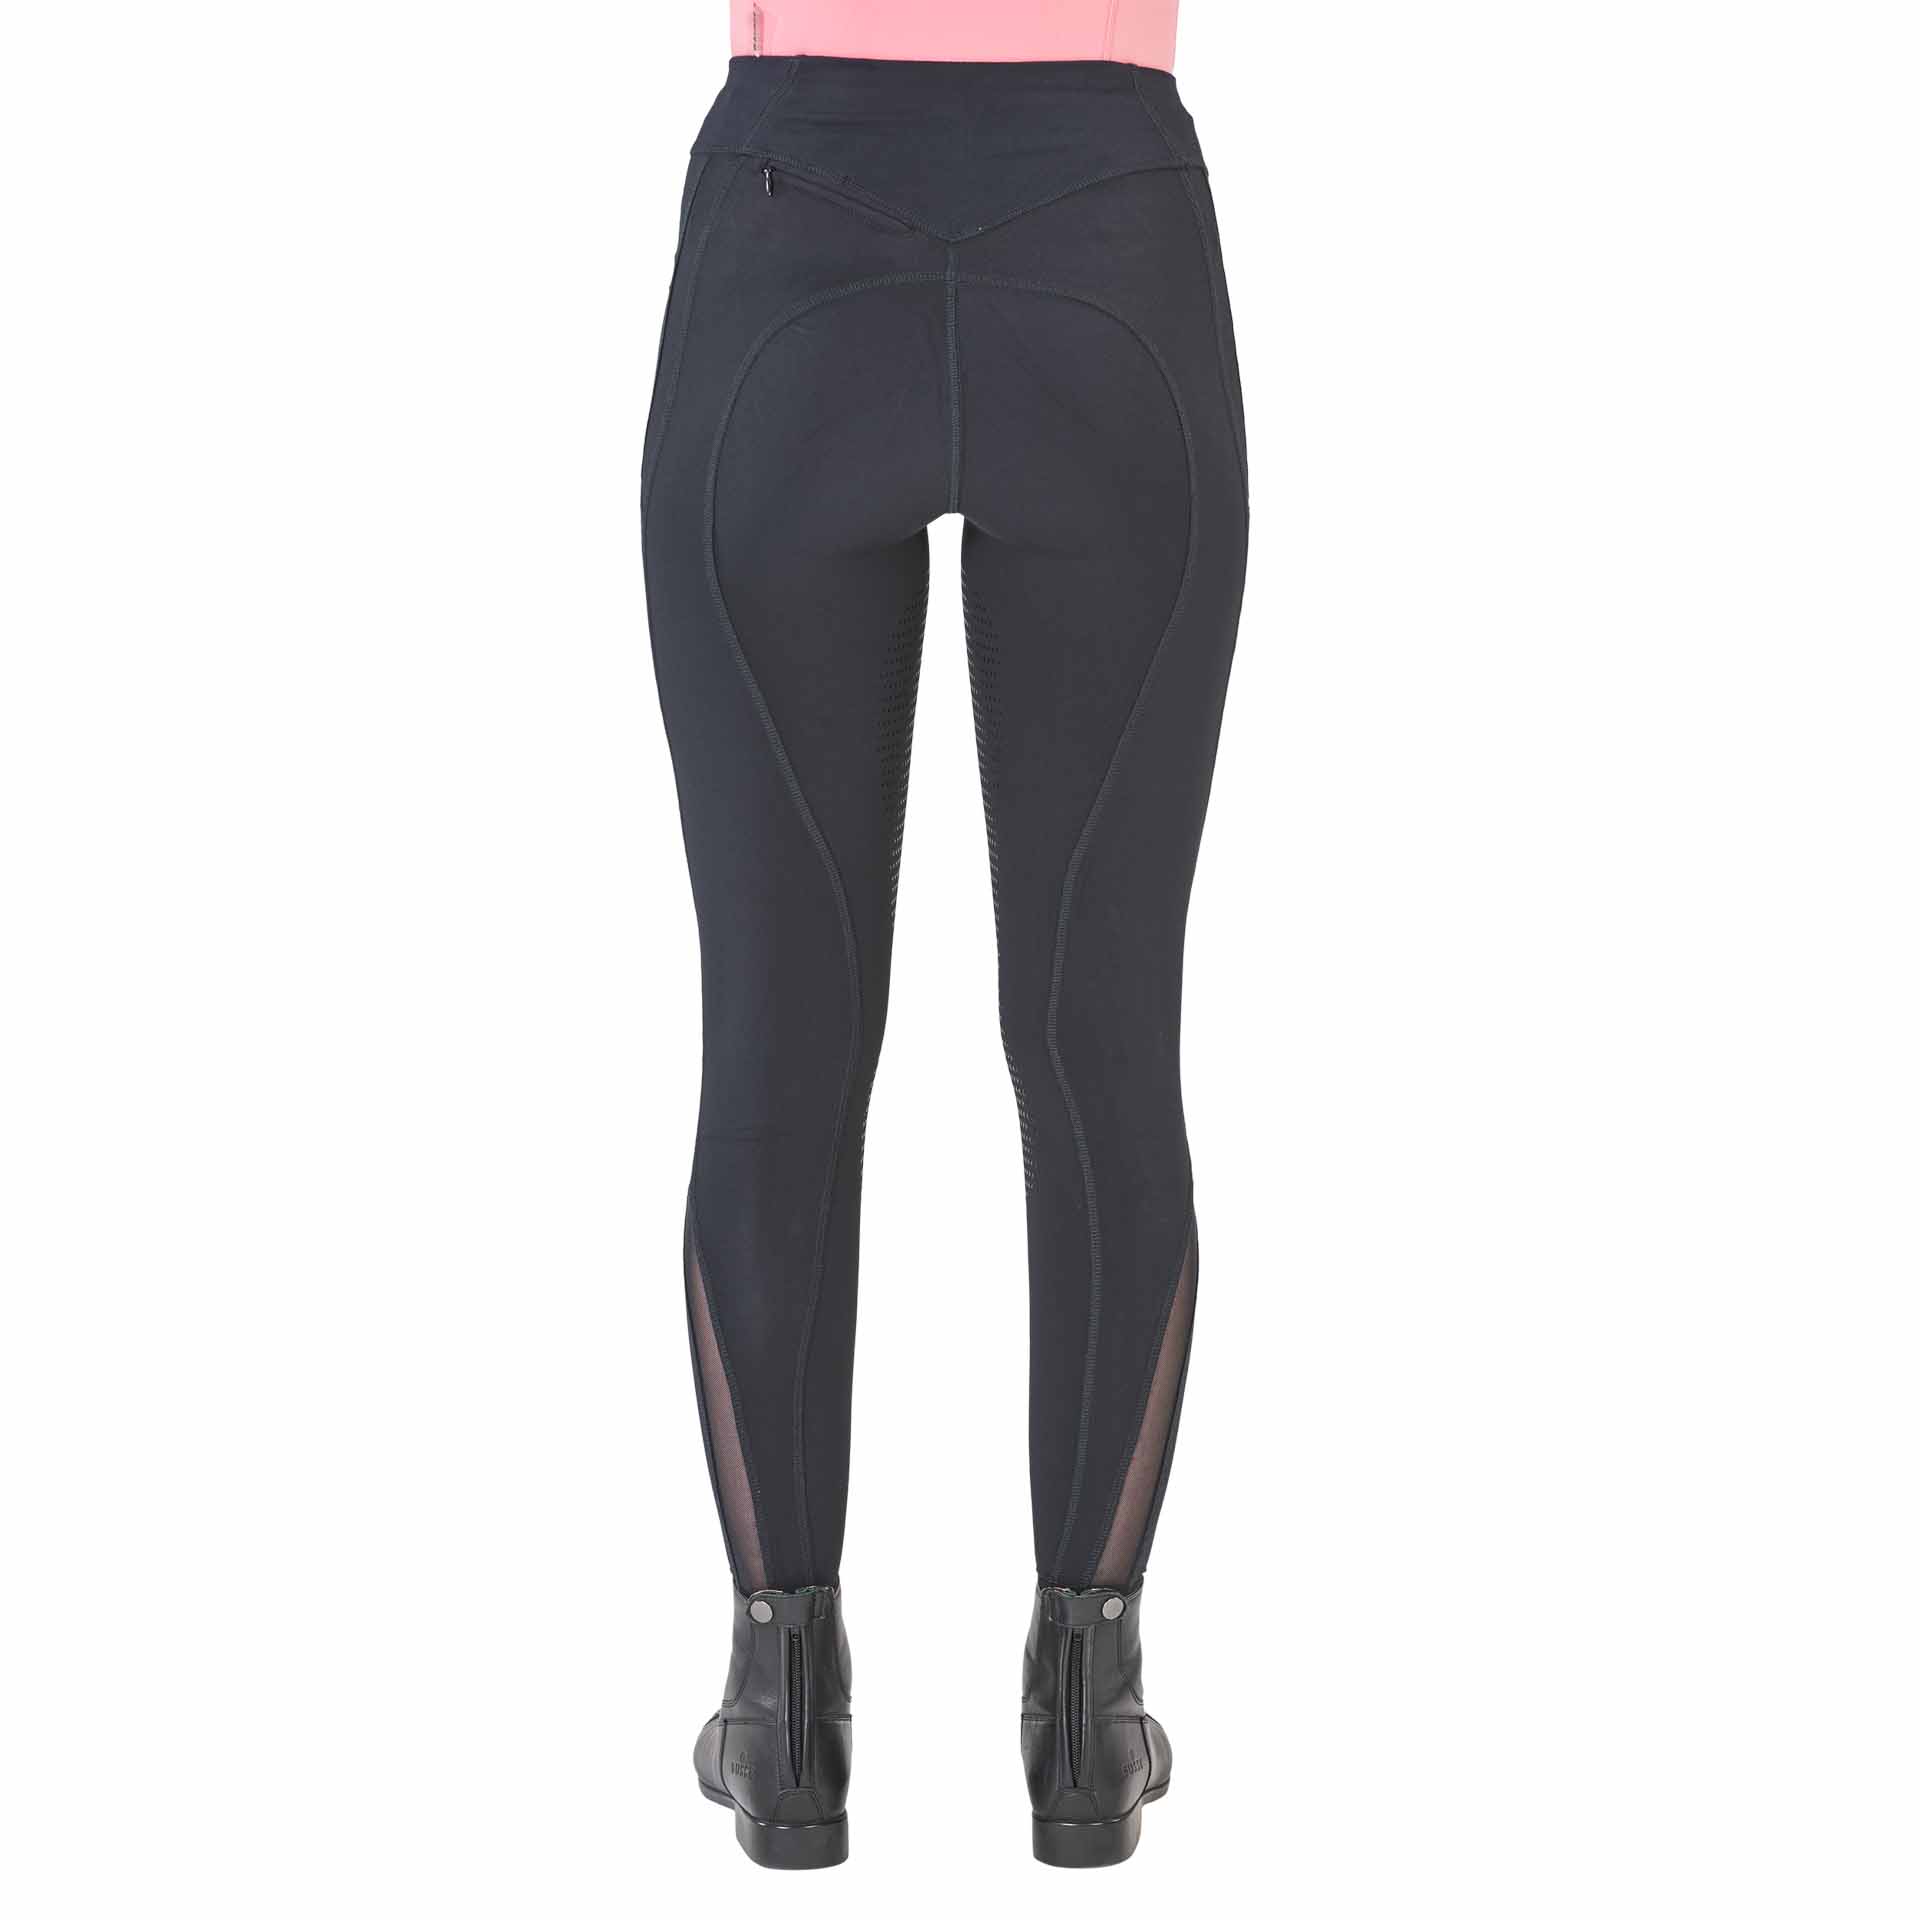 BUSSE Riding Tights AIRY II 36 black